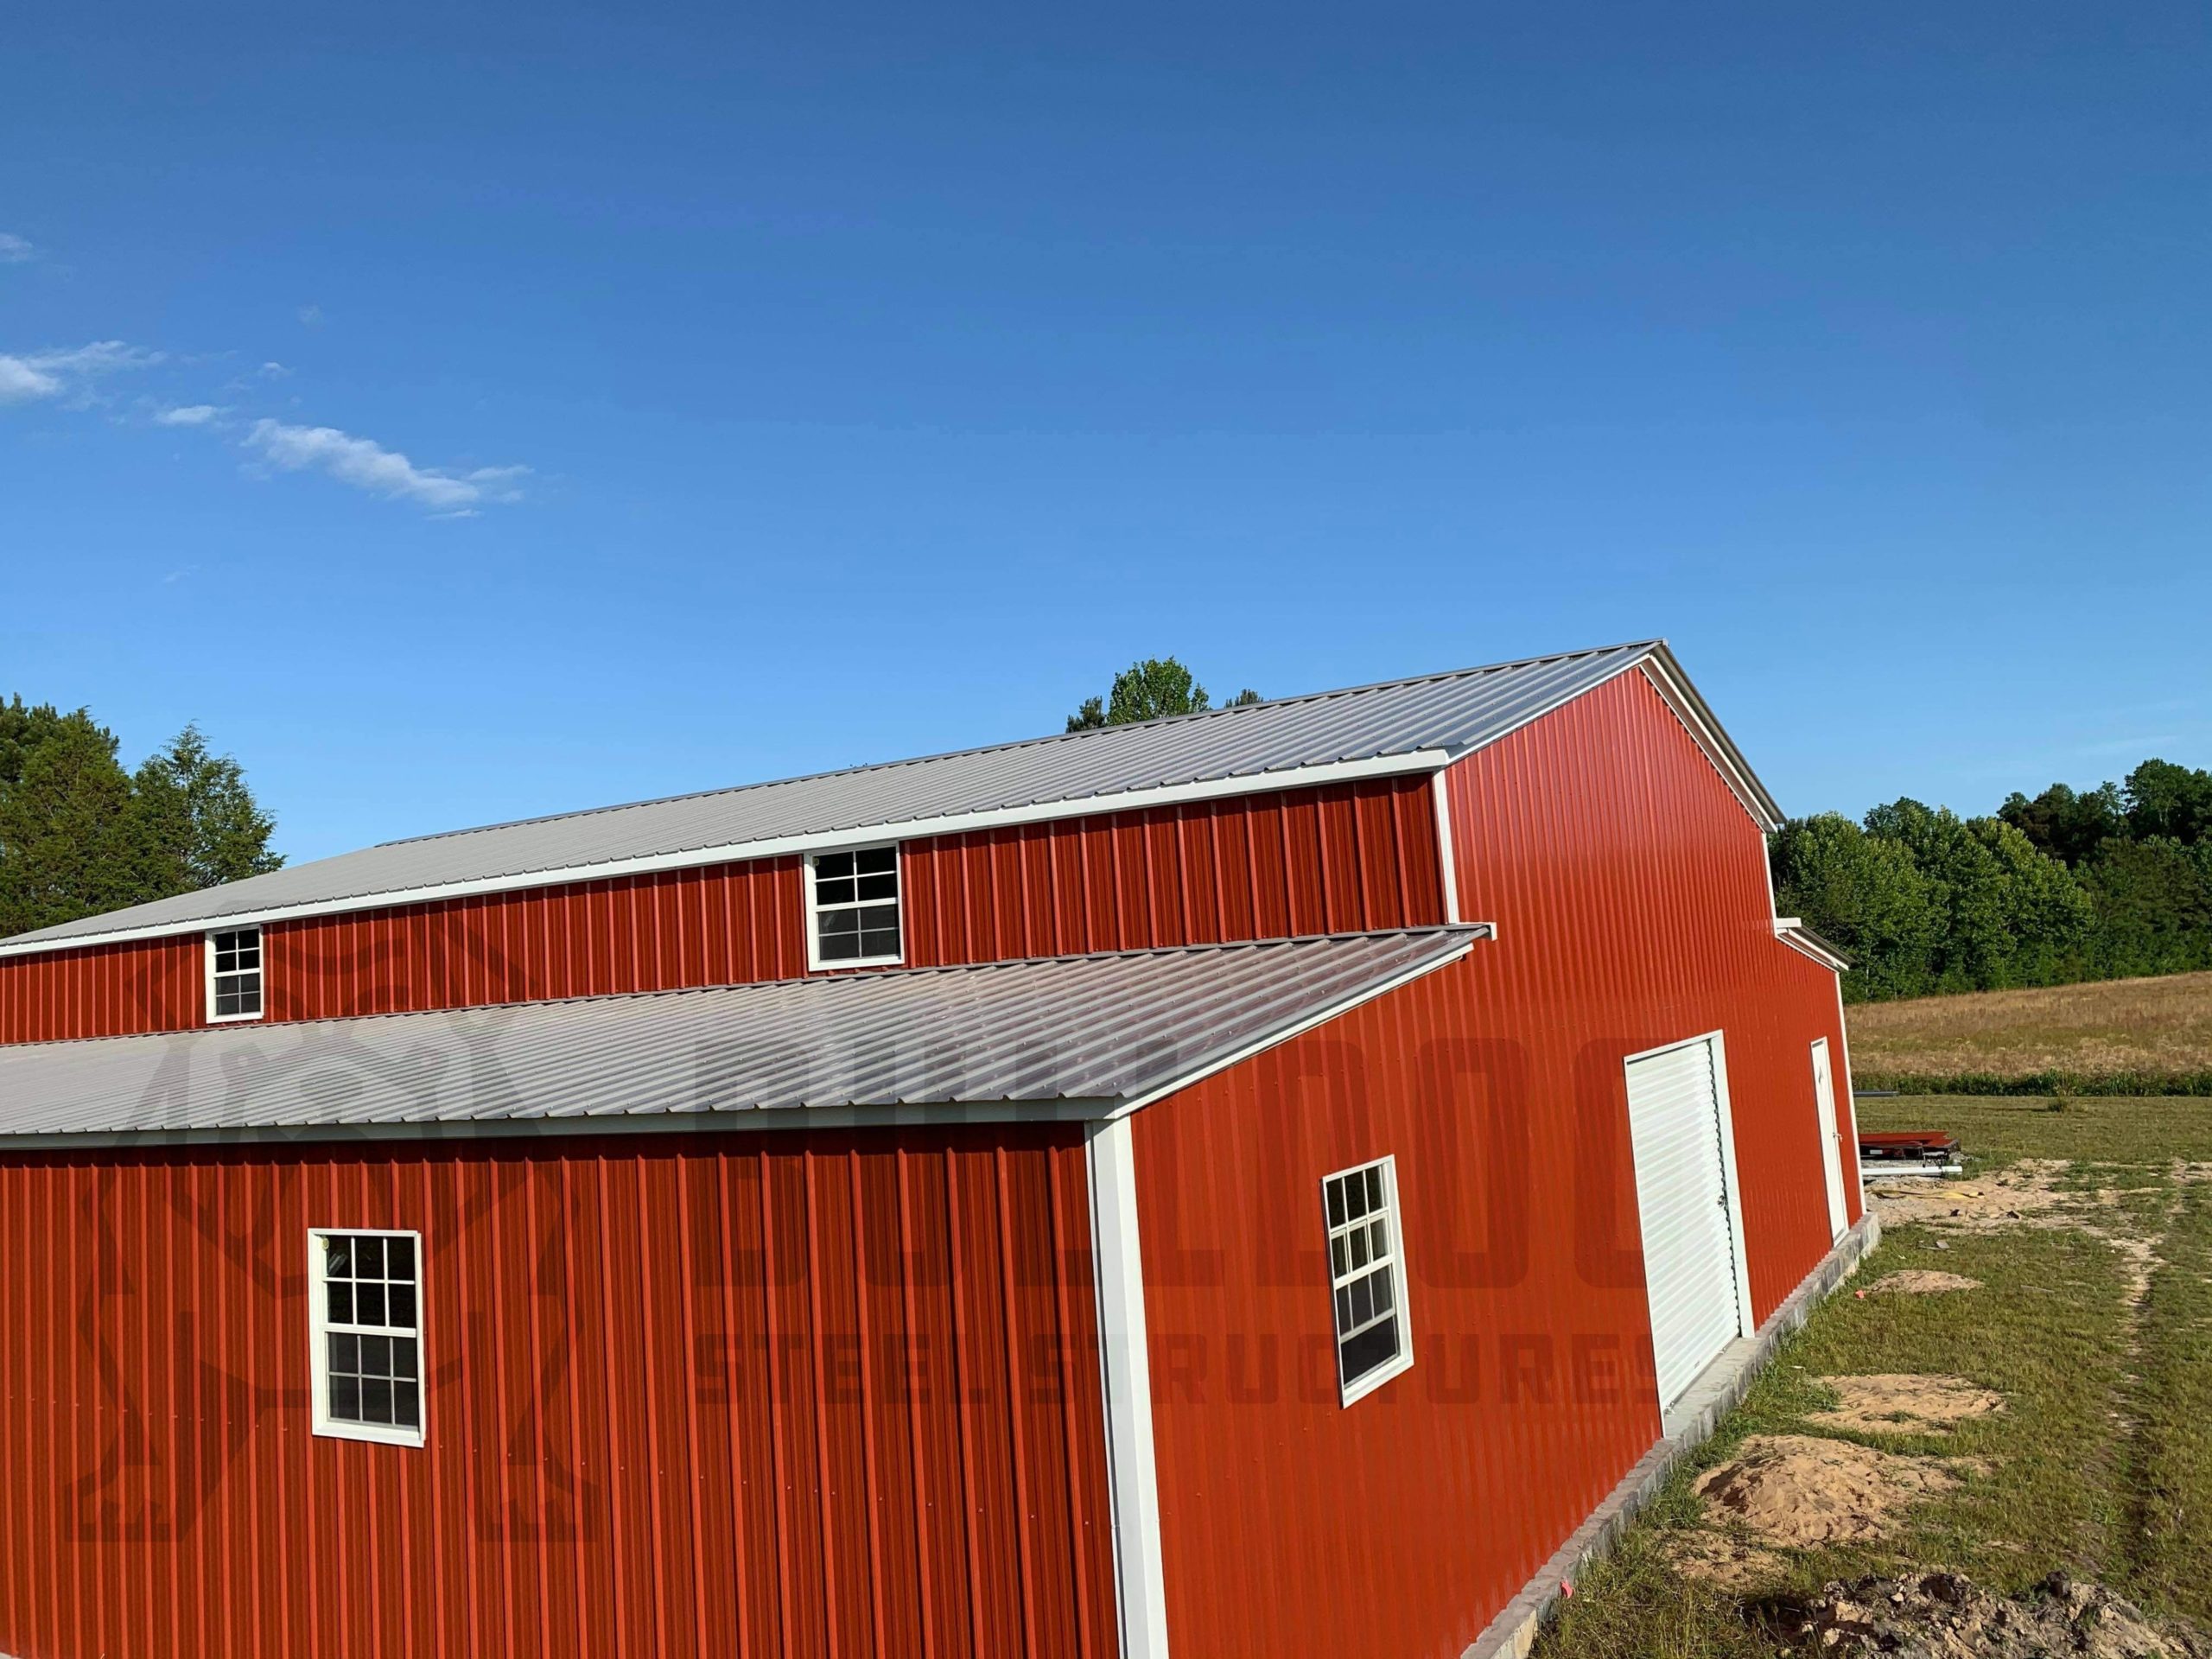 Exterior of red barn with white trim and doors